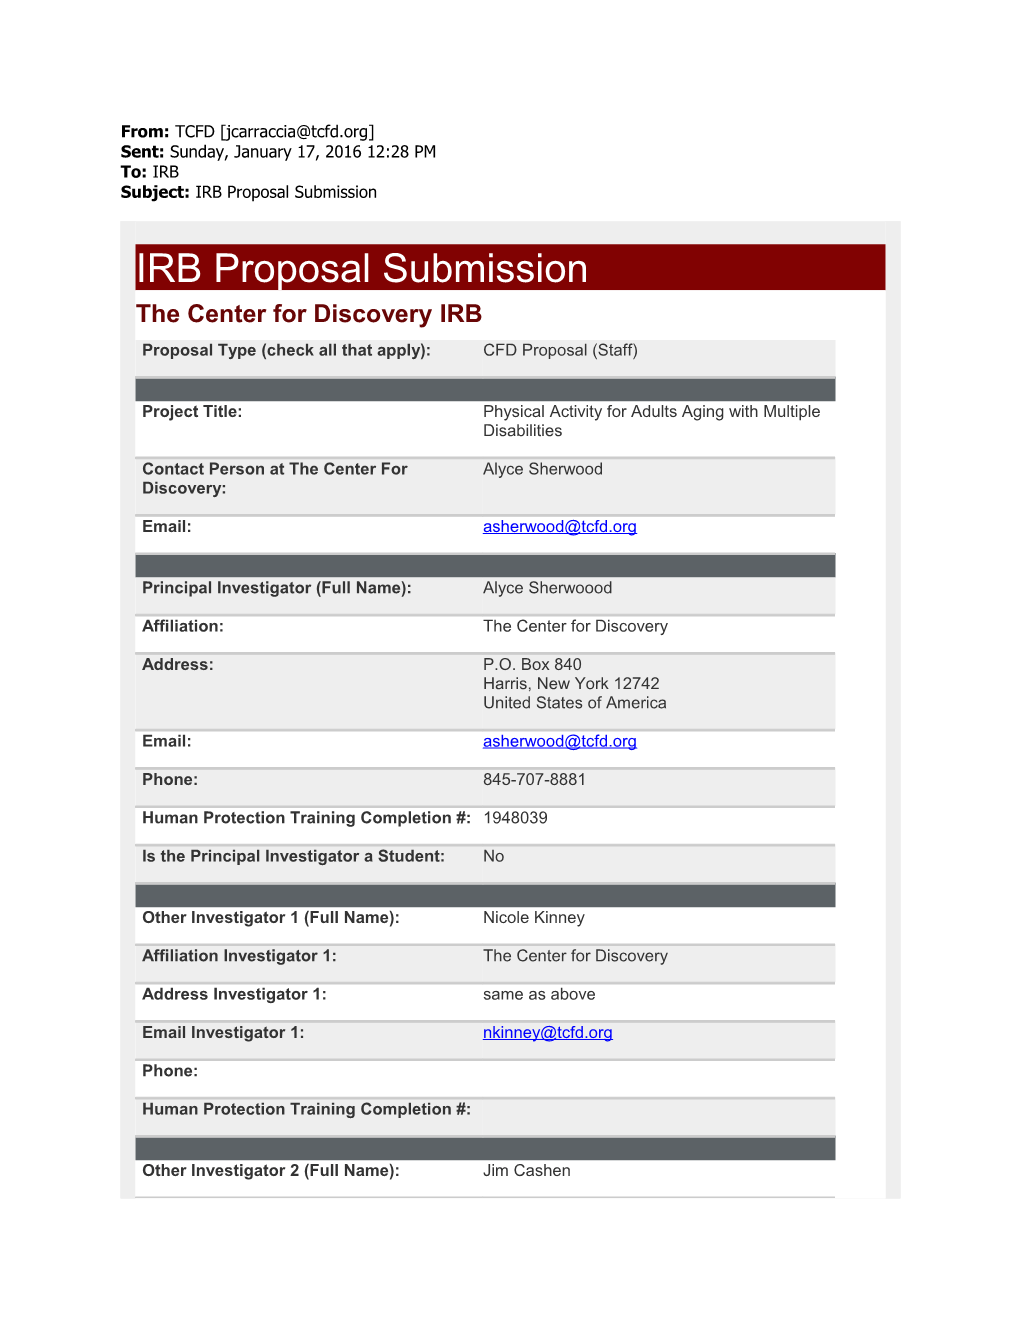 From: TCFD Sent: Sunday, January 17, 2016 12:28 PM To: IRB Subject: IRB Proposal Submission